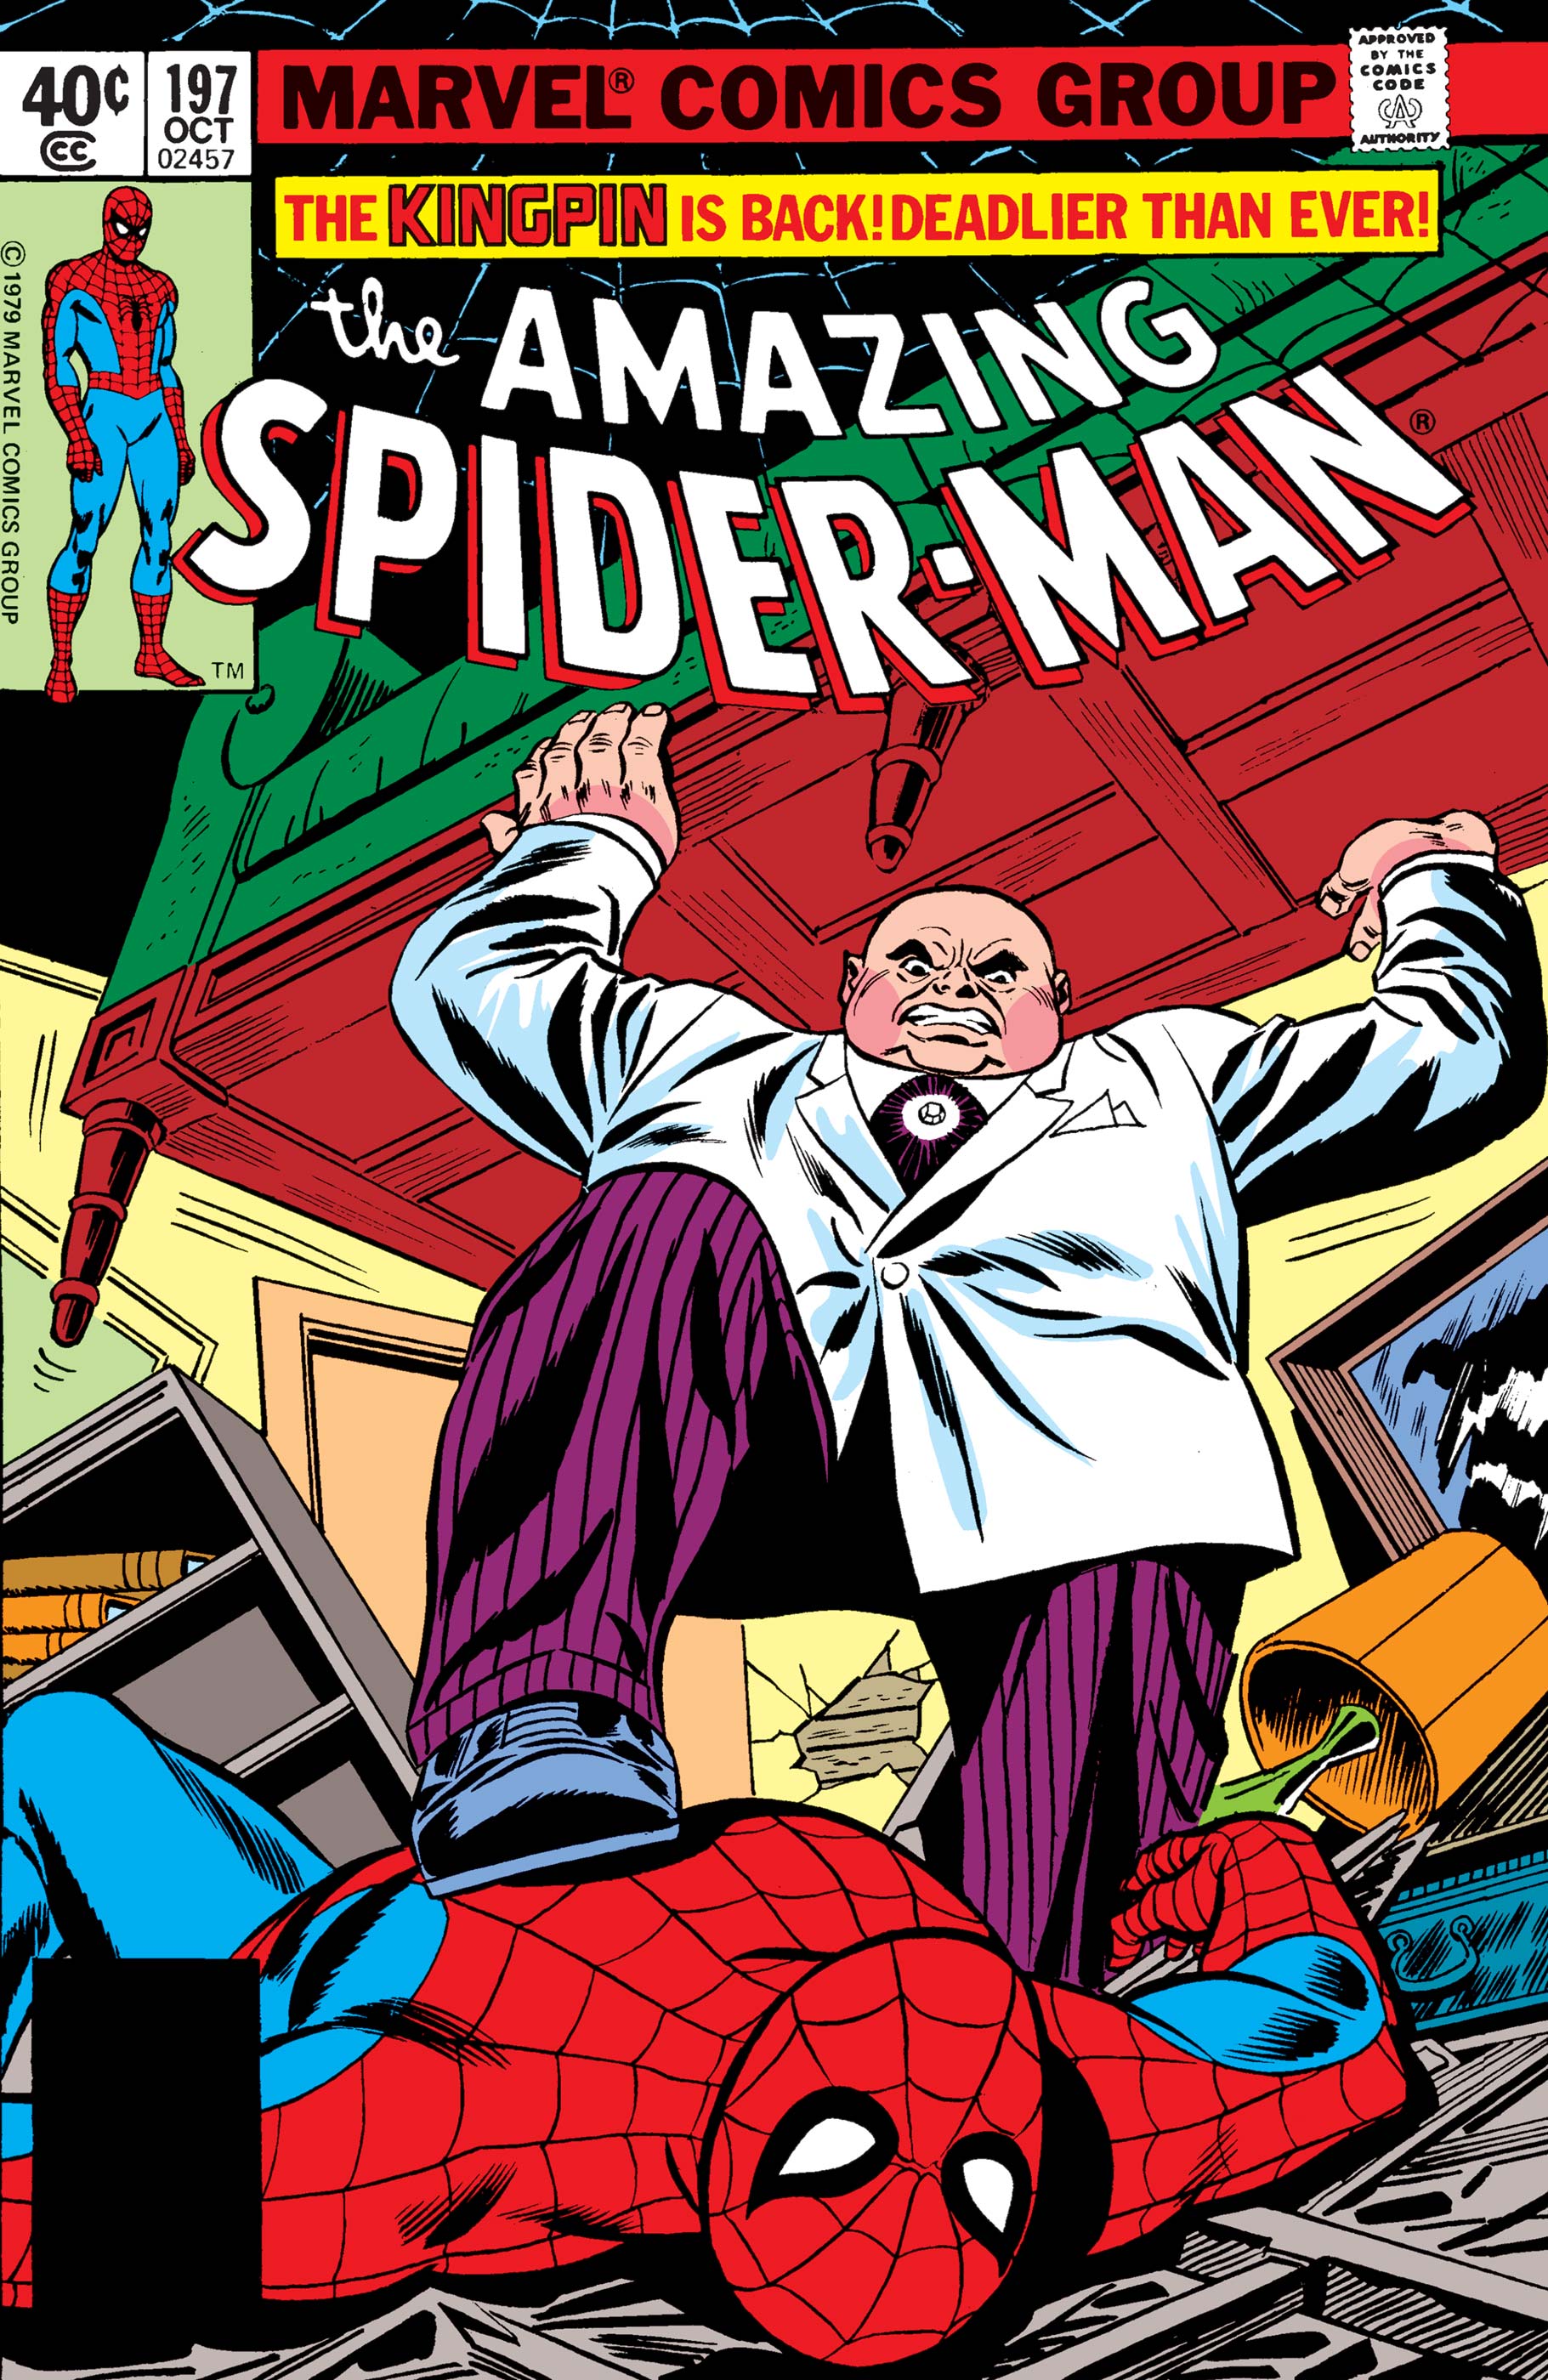 The Amazing Spider-Man (1963) #197 | Comic Issues | Marvel